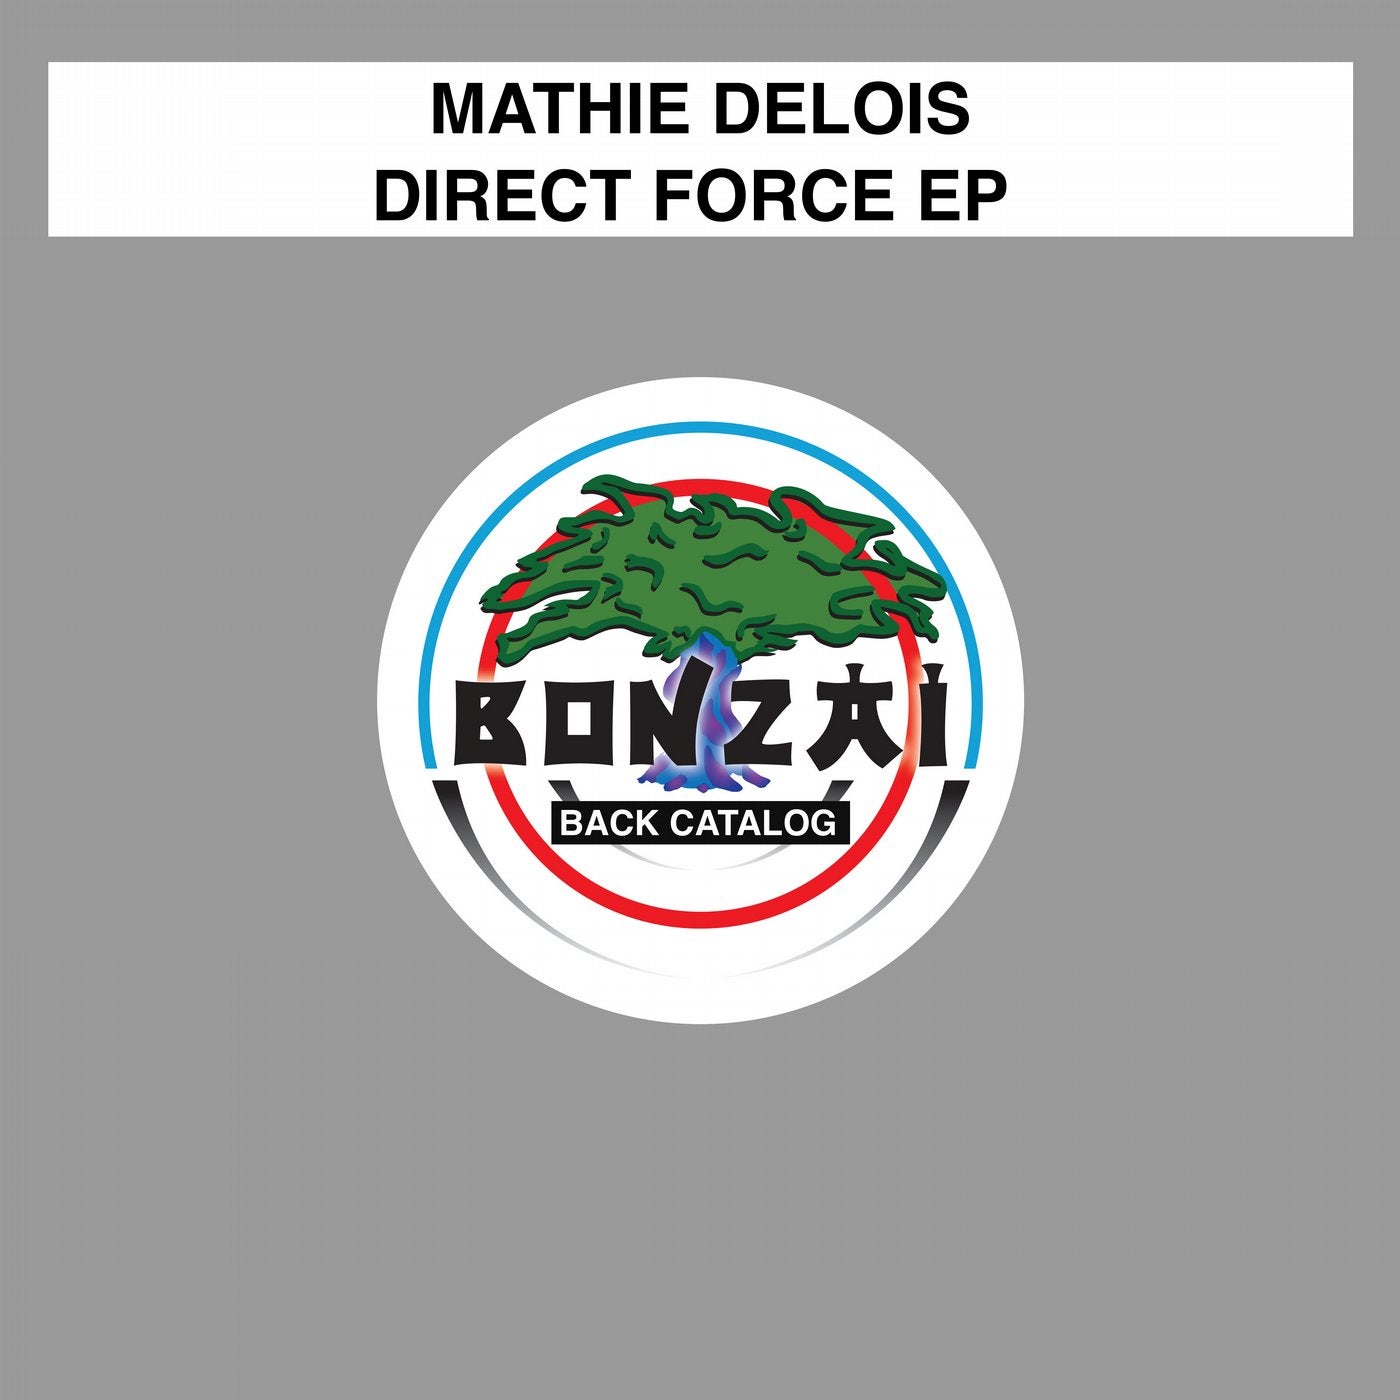 Direct Force EP